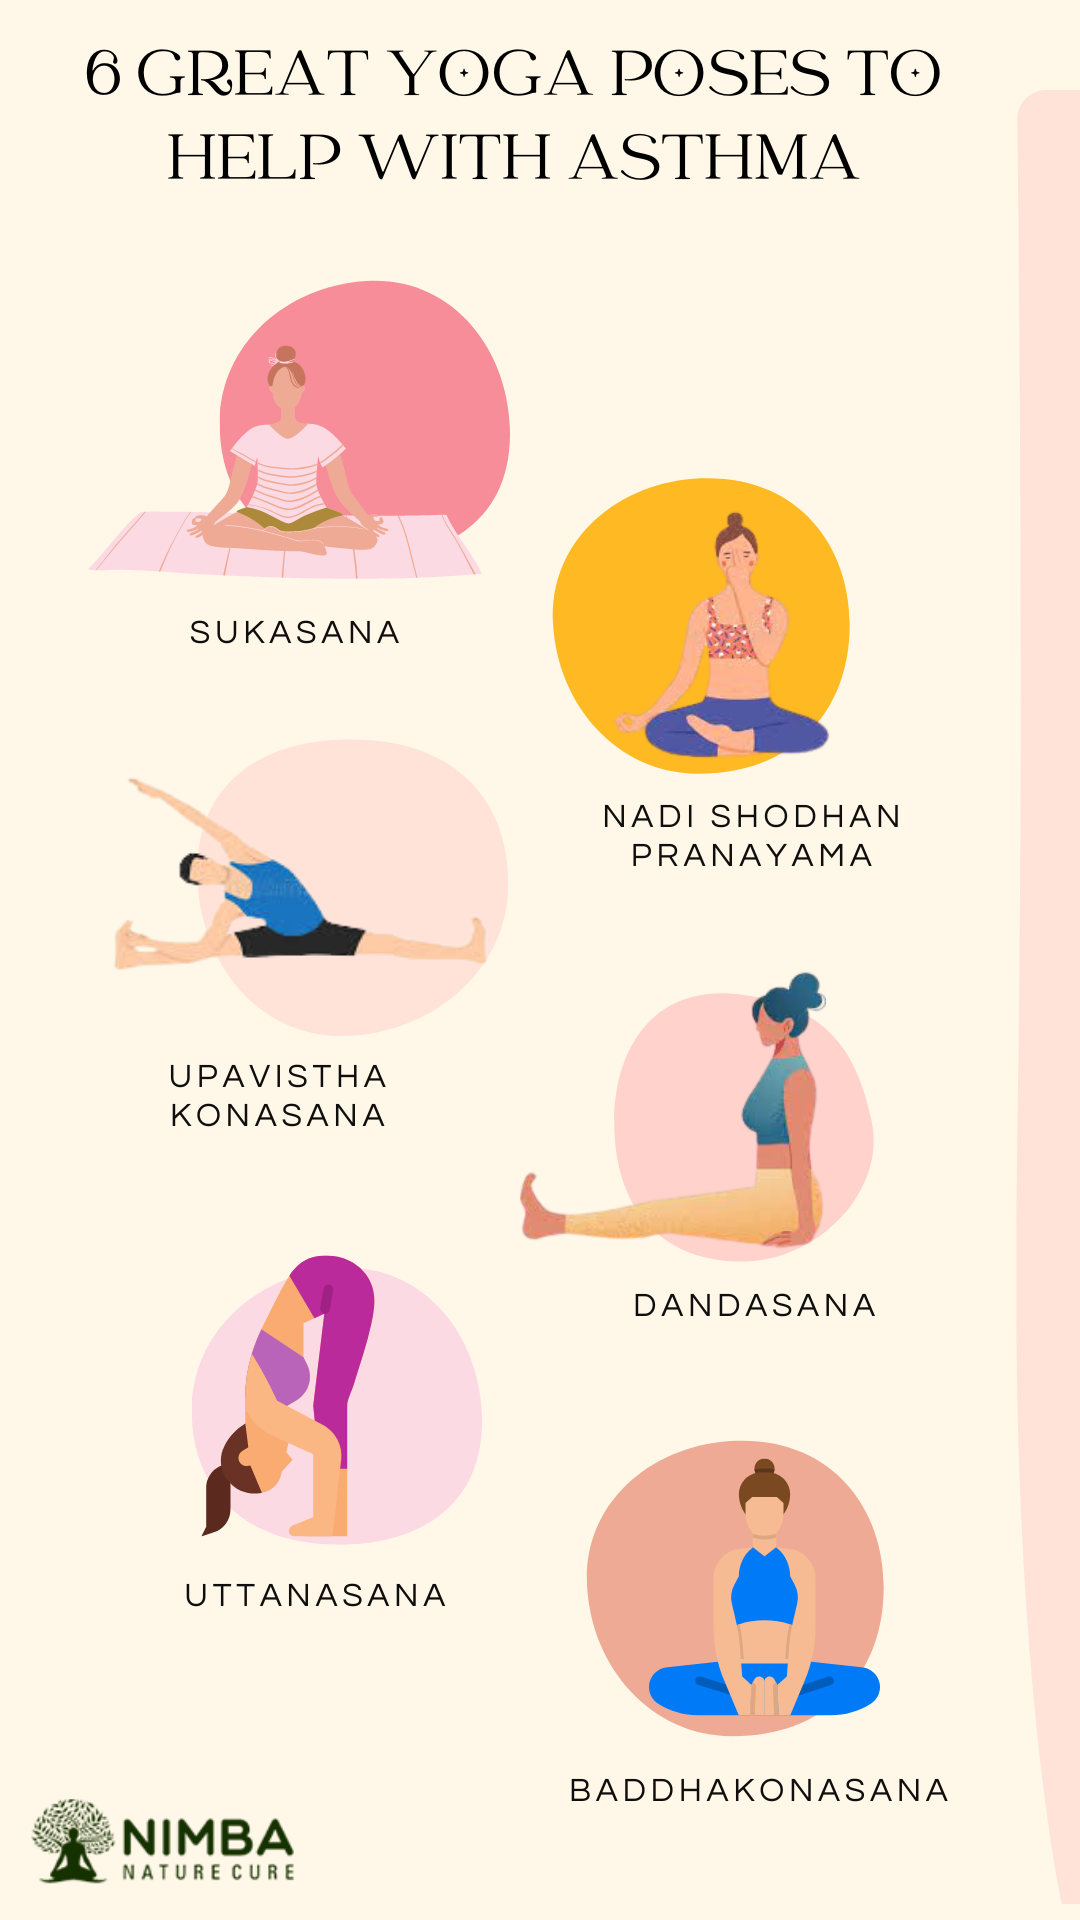 6 Great Yoga Poses to Help with Asthma